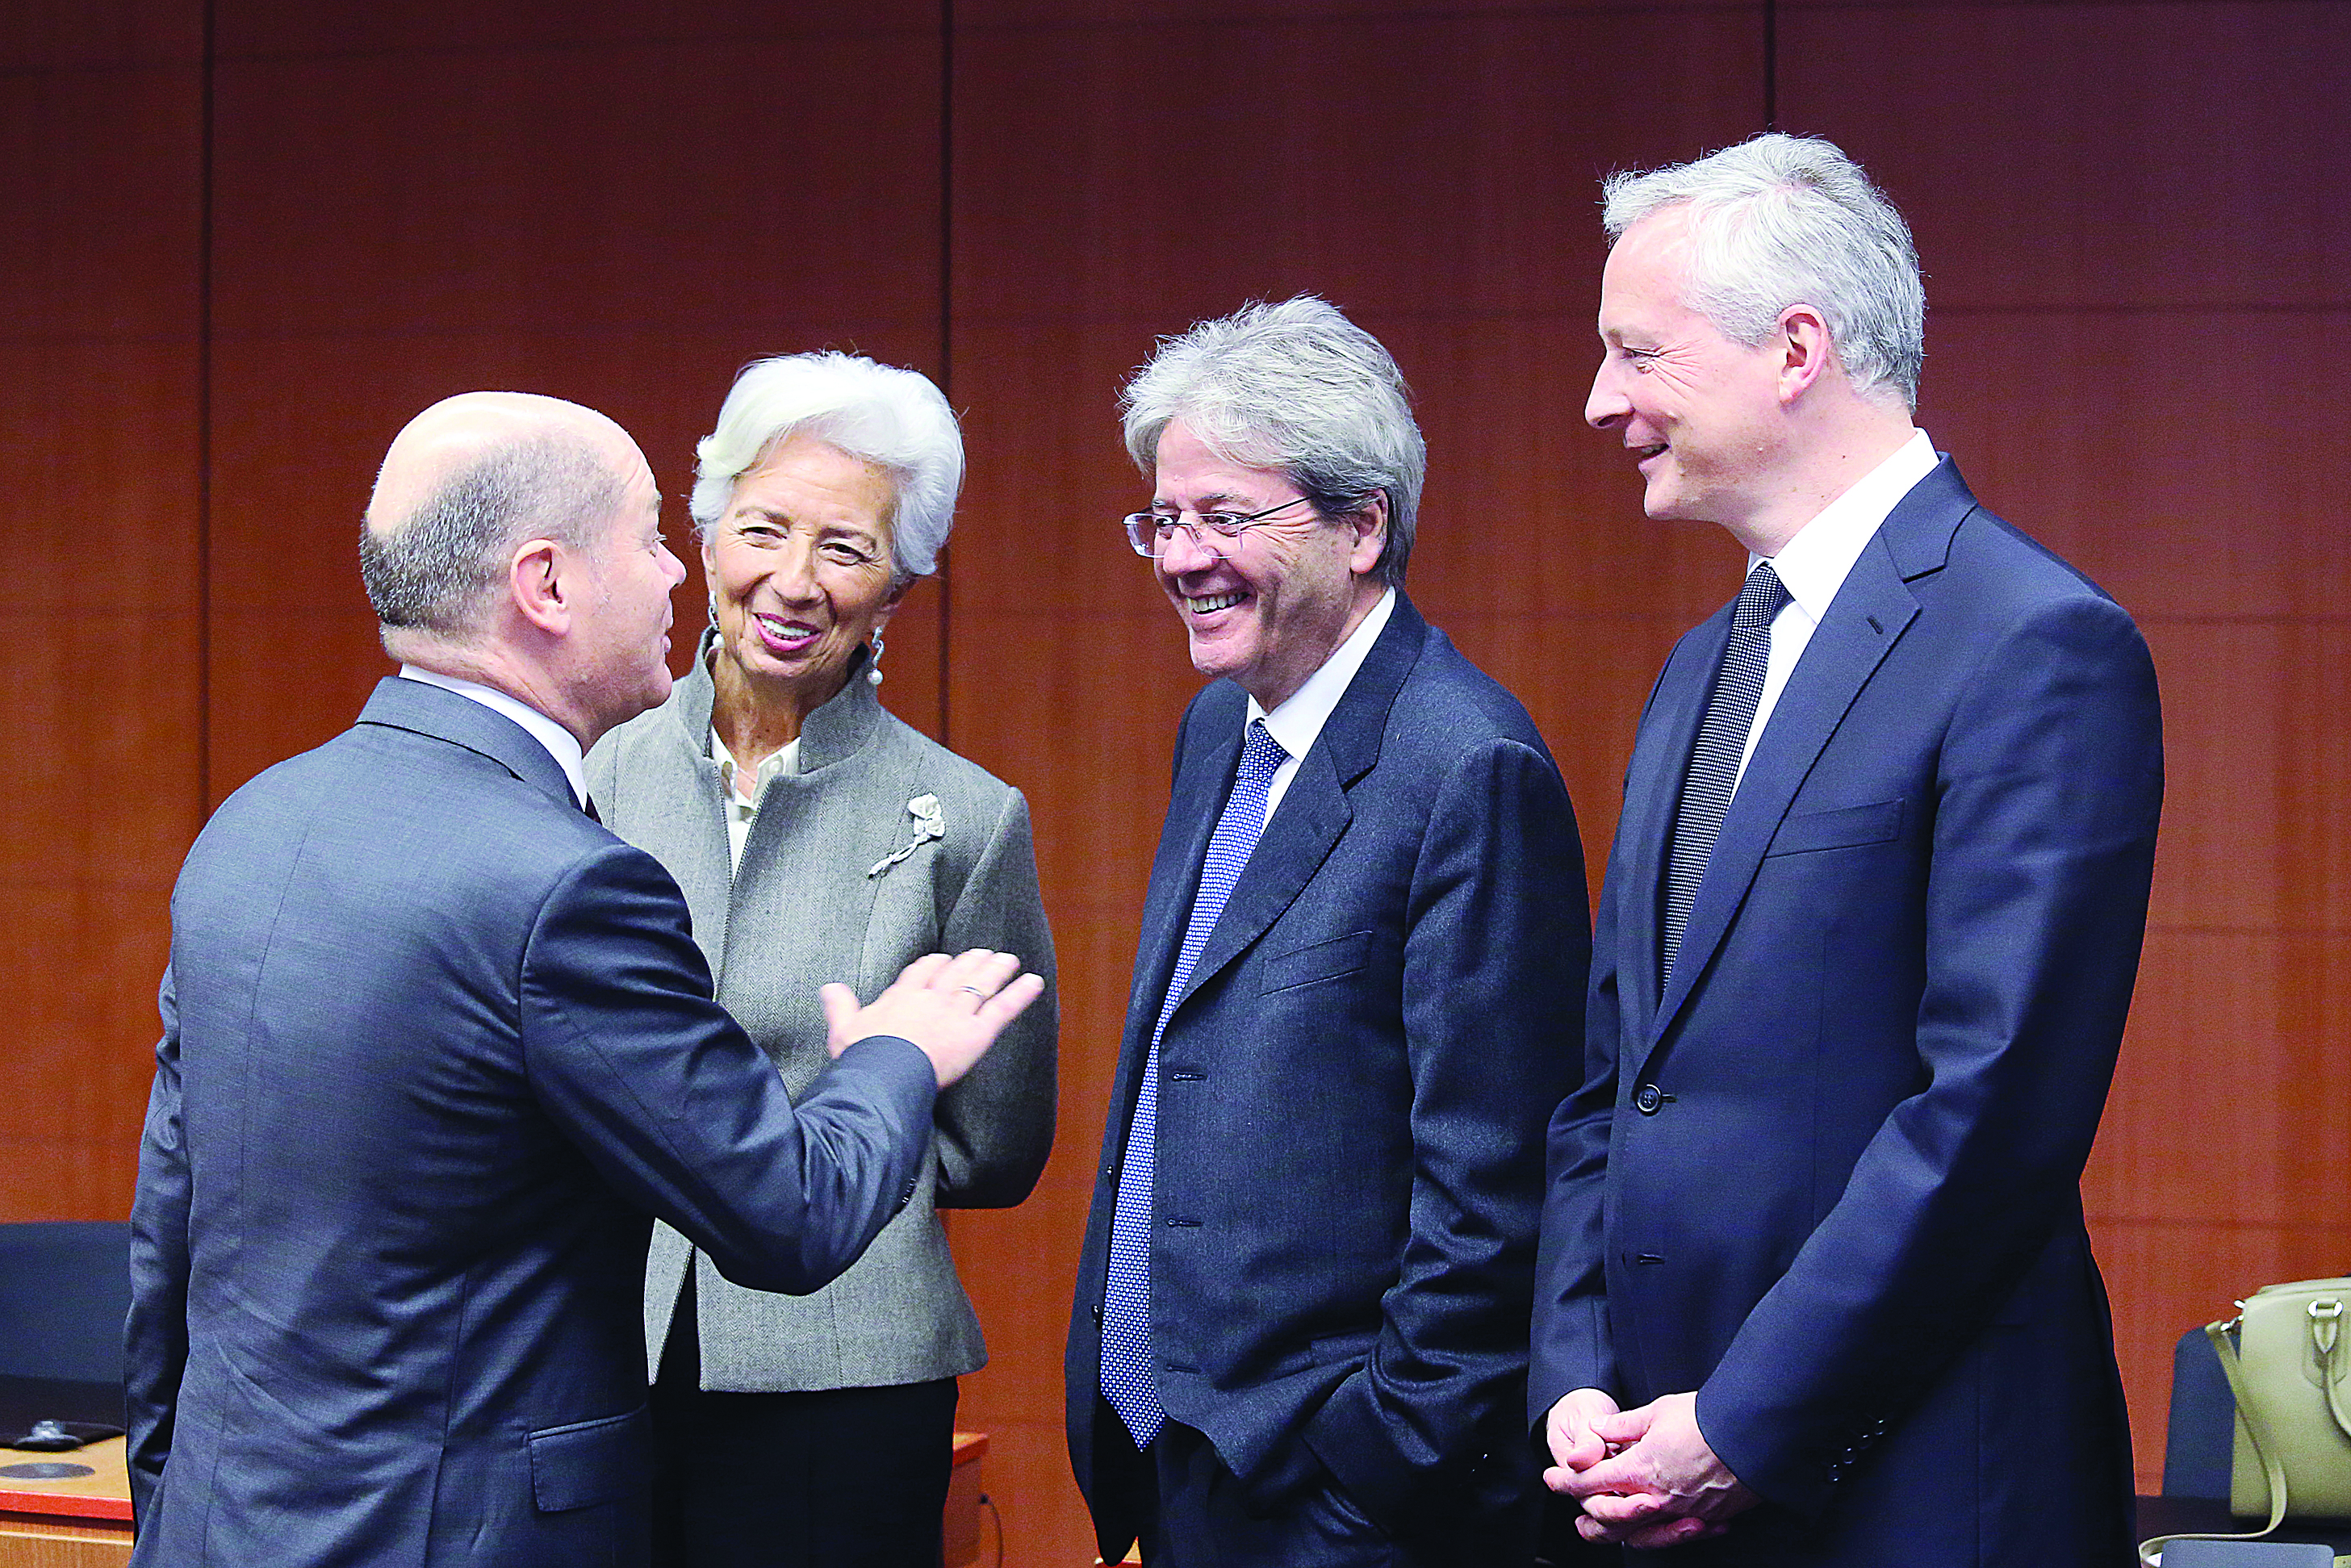 (L-R) German Finance Minister Olaf Scholz, President of the European Central Bank (ECB) Christine Lagarde, European Commissioner for Economy Paolo Gentiloni and French Economy and Finance Minister Bruno Le Maire speak as they attend a Eurogroup meeting at the EU headquarters in Brussels on February 17, 2020. (Photo by FranÁois WALSCHAERTS / POOL / AFP)